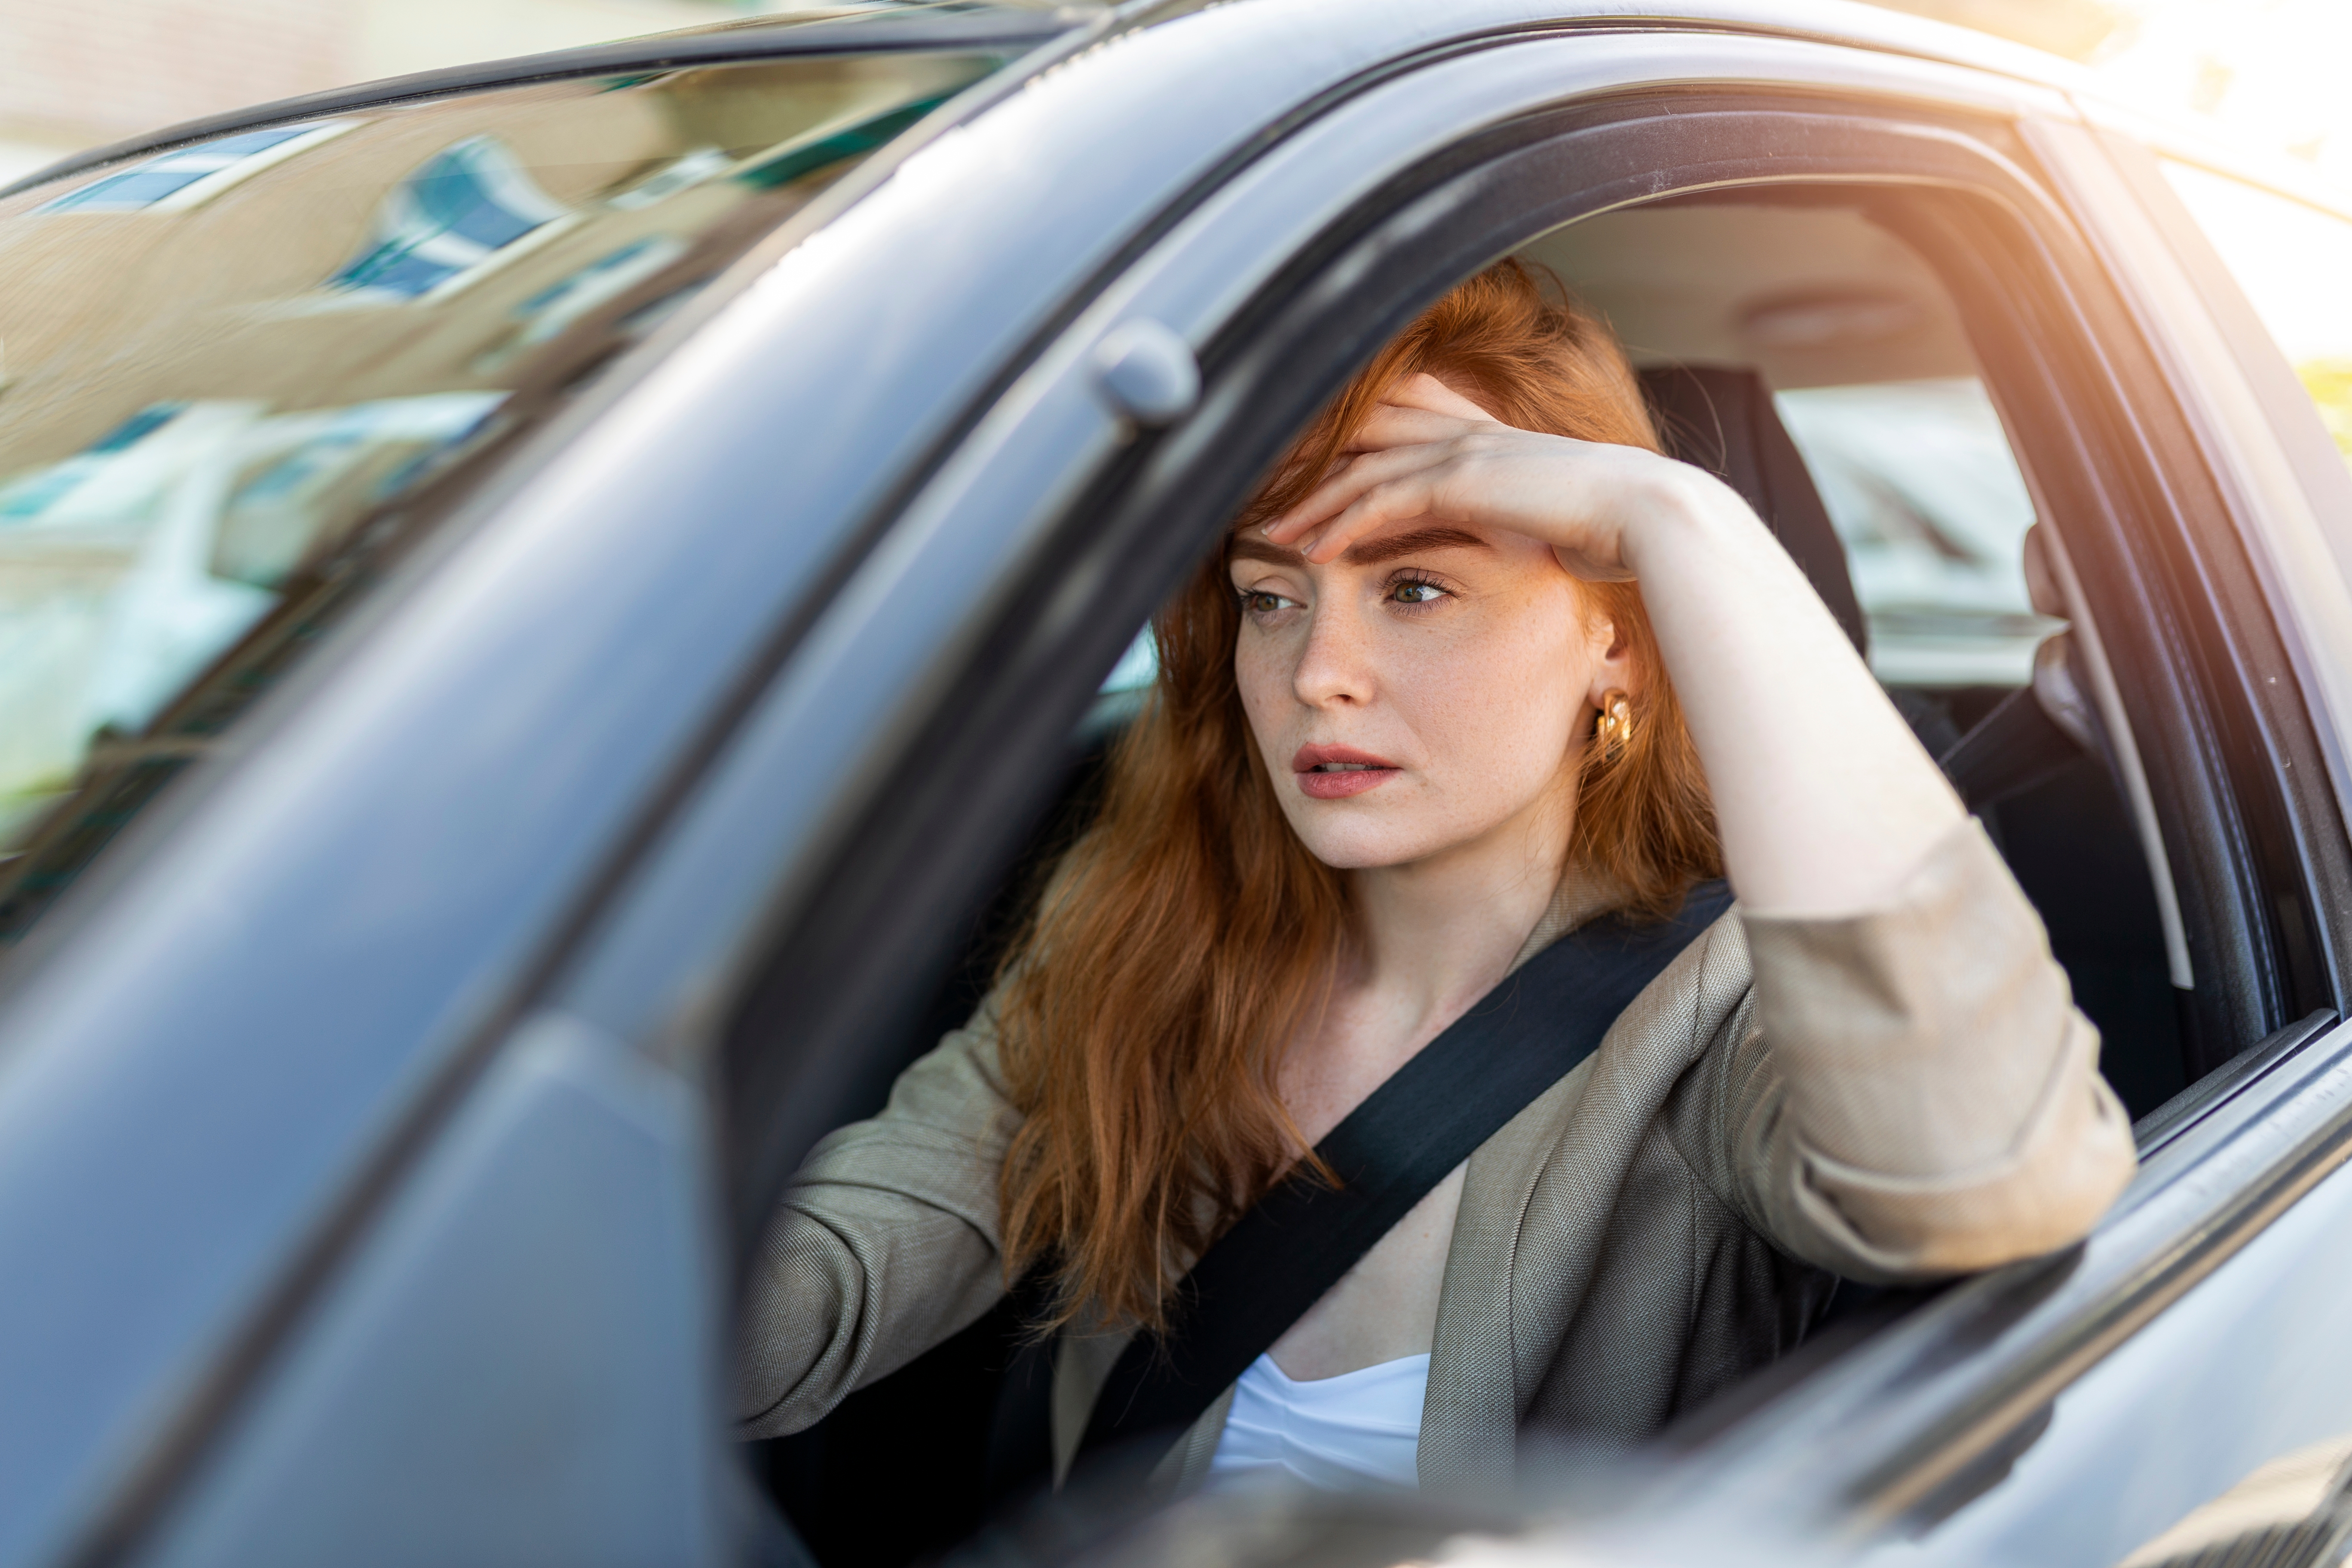 Nervous female driver sits at wheel | Source: Shutterstock.com